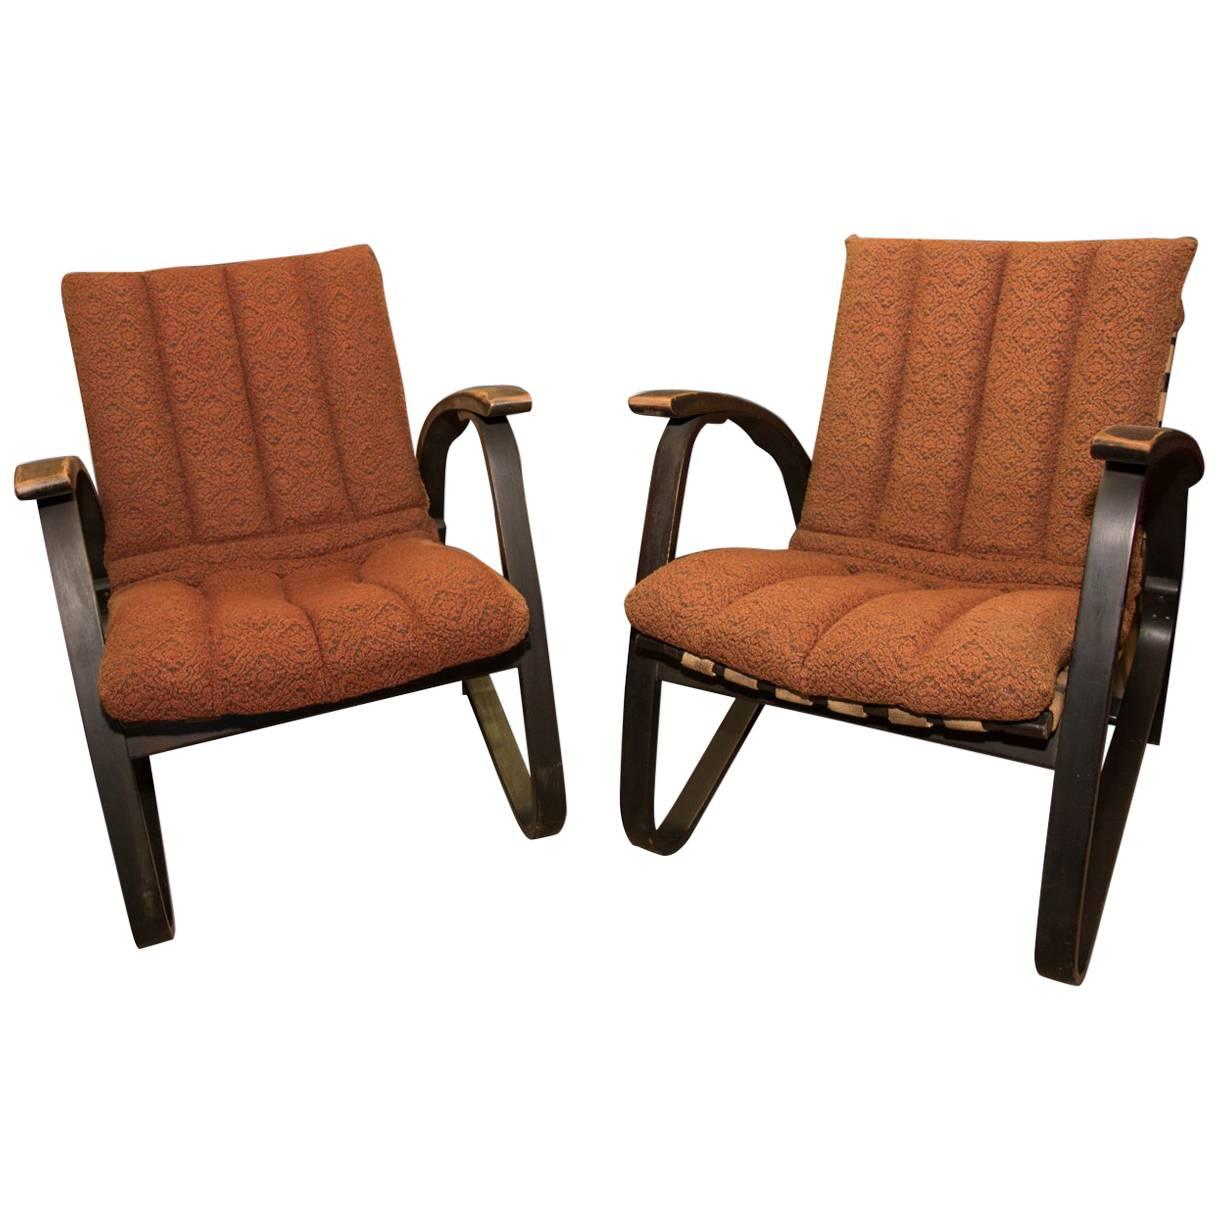 Pair of Bentwood Armchairs with Woven Straps by Jan Vanek for UP Zavody, 1930s